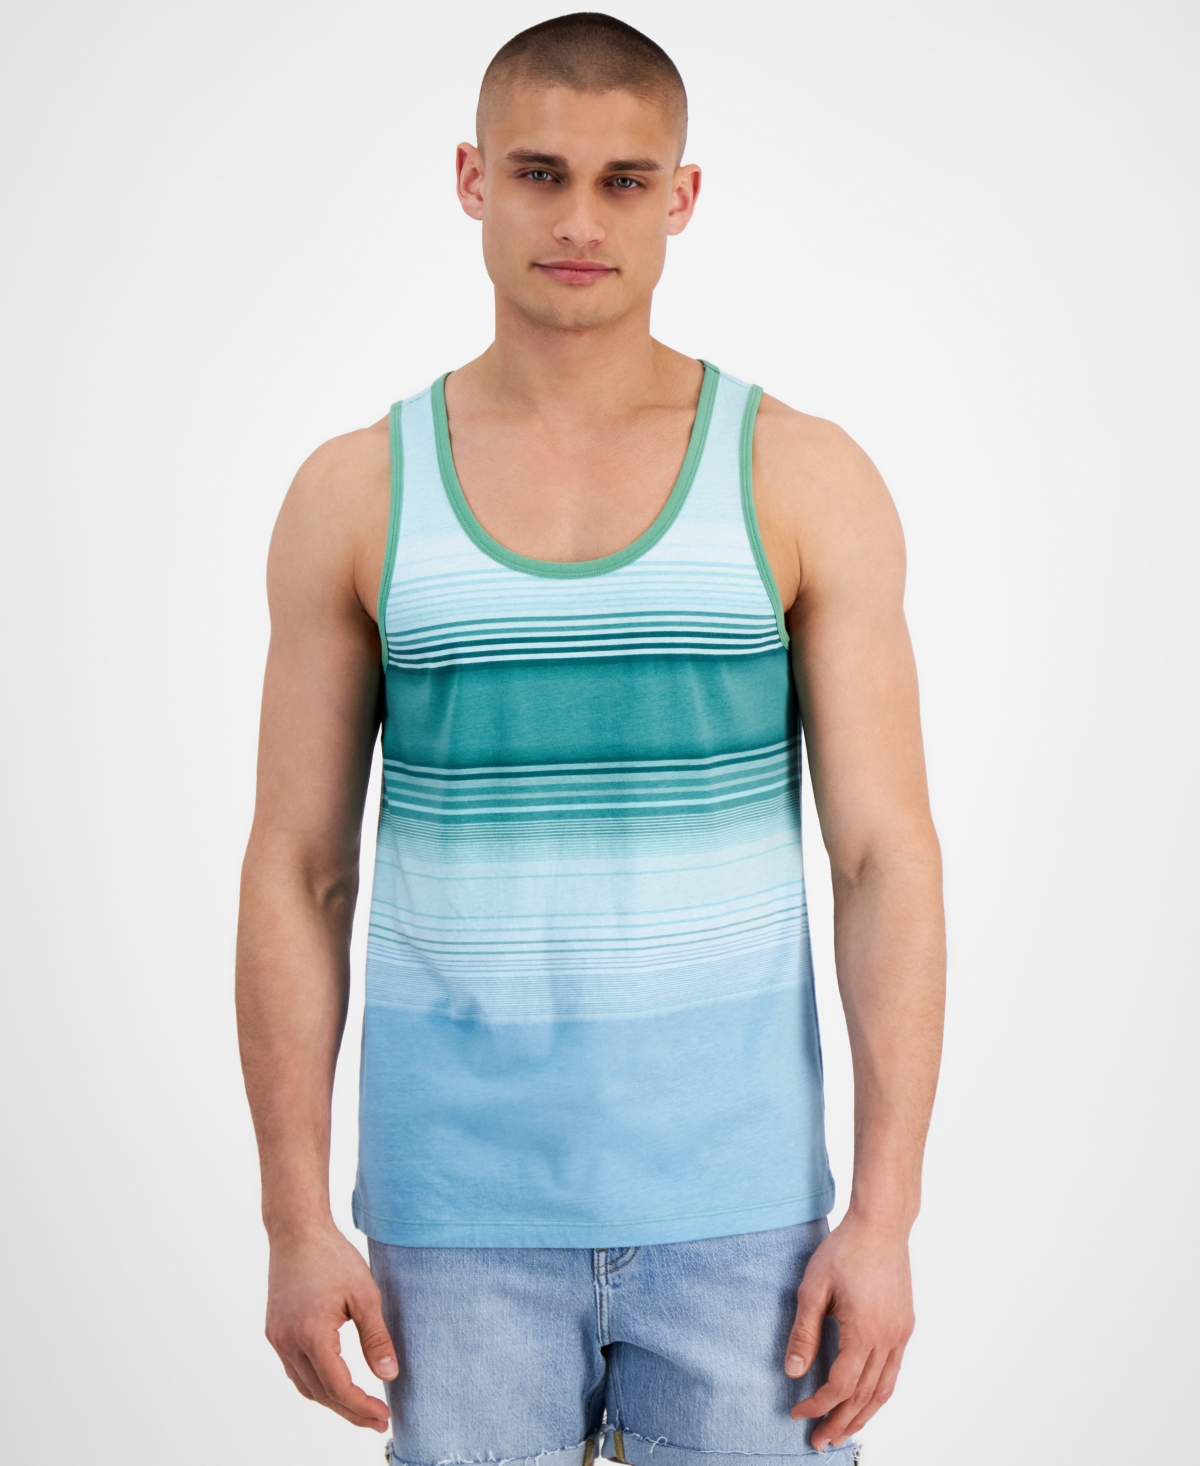 Men's Soft Striped Tank Top, Created for Macy's - Green Mist